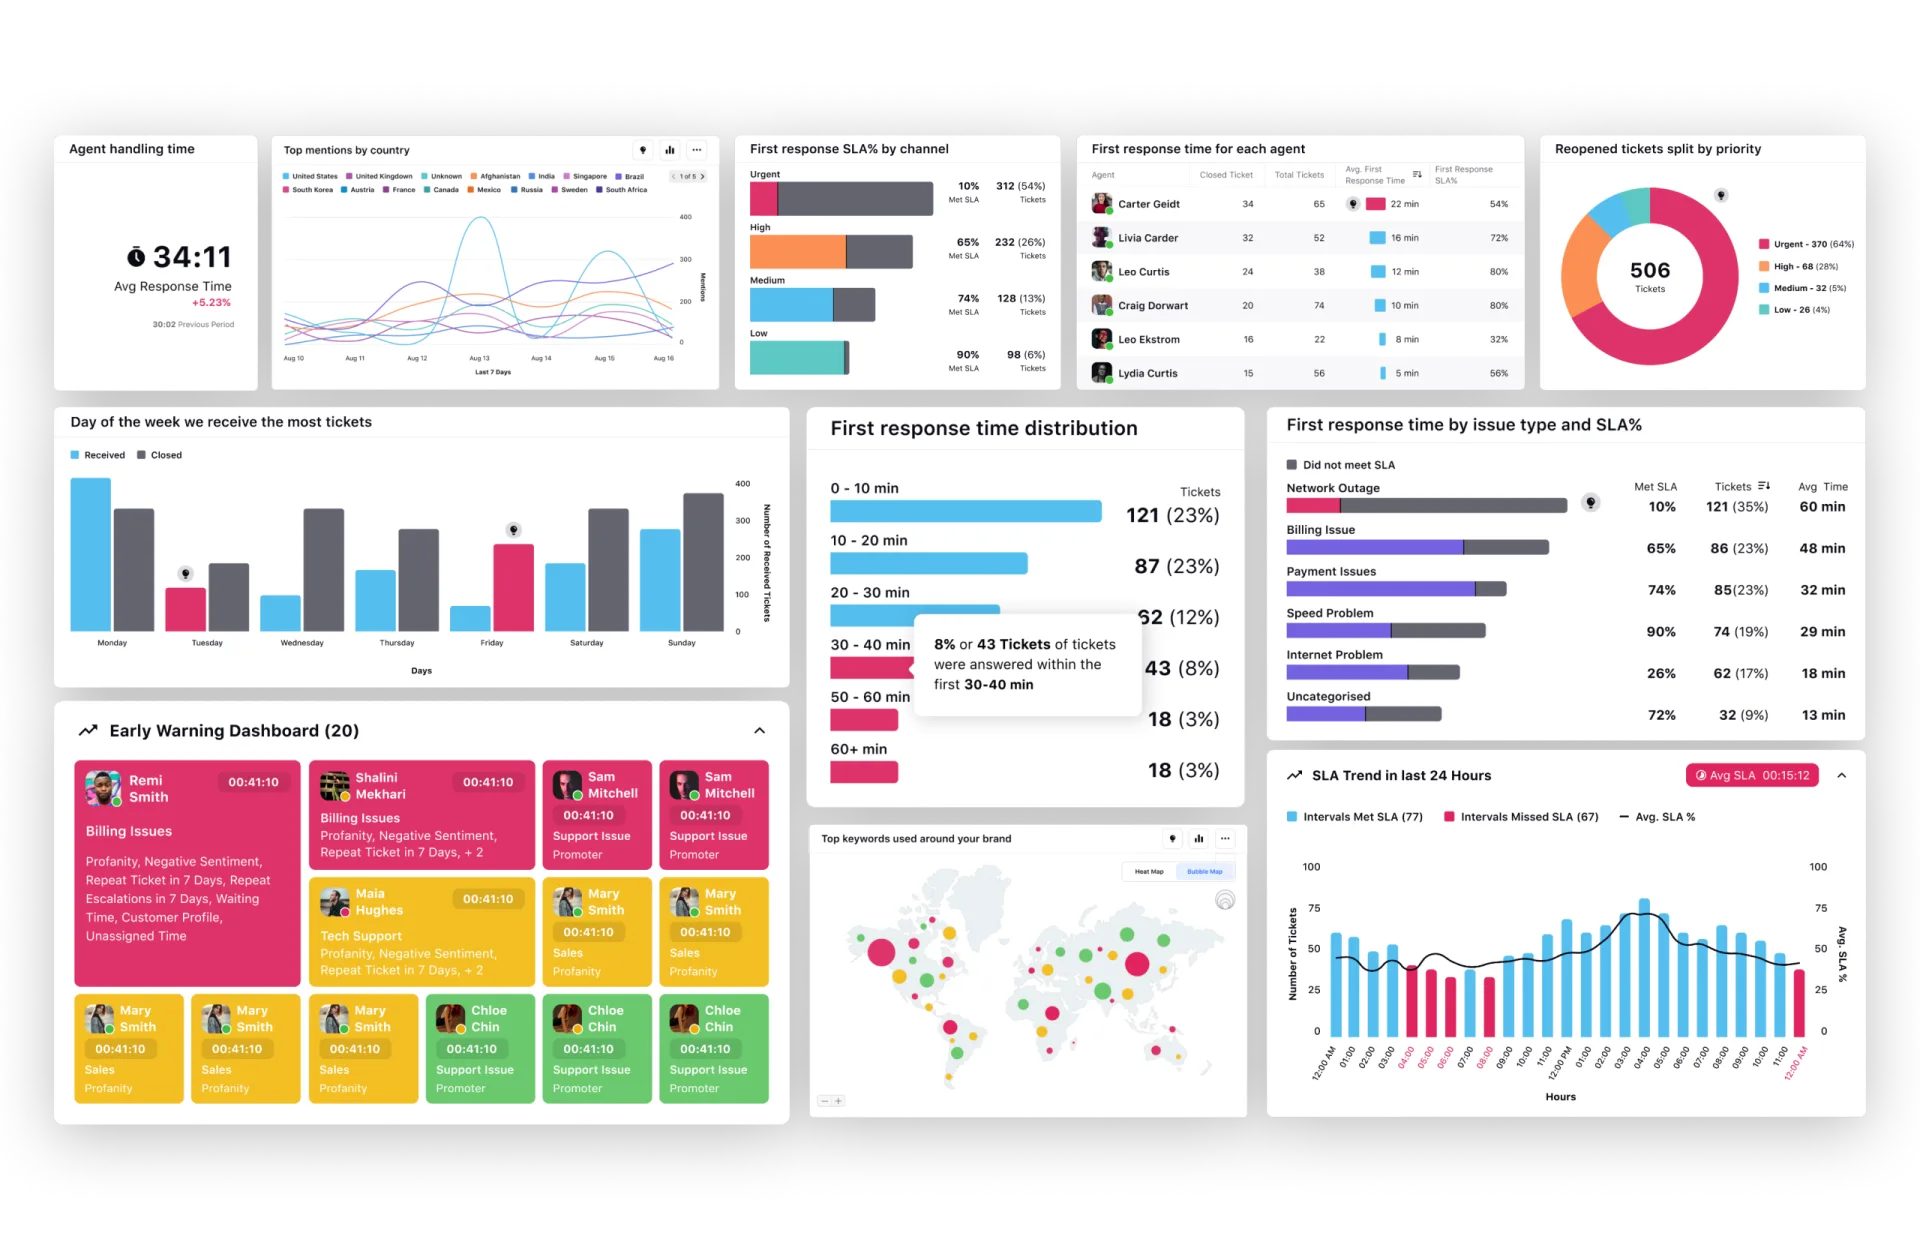 Analytics and reporting dashboard in Sprinklr Service for monitoring call center analytics and efficiency